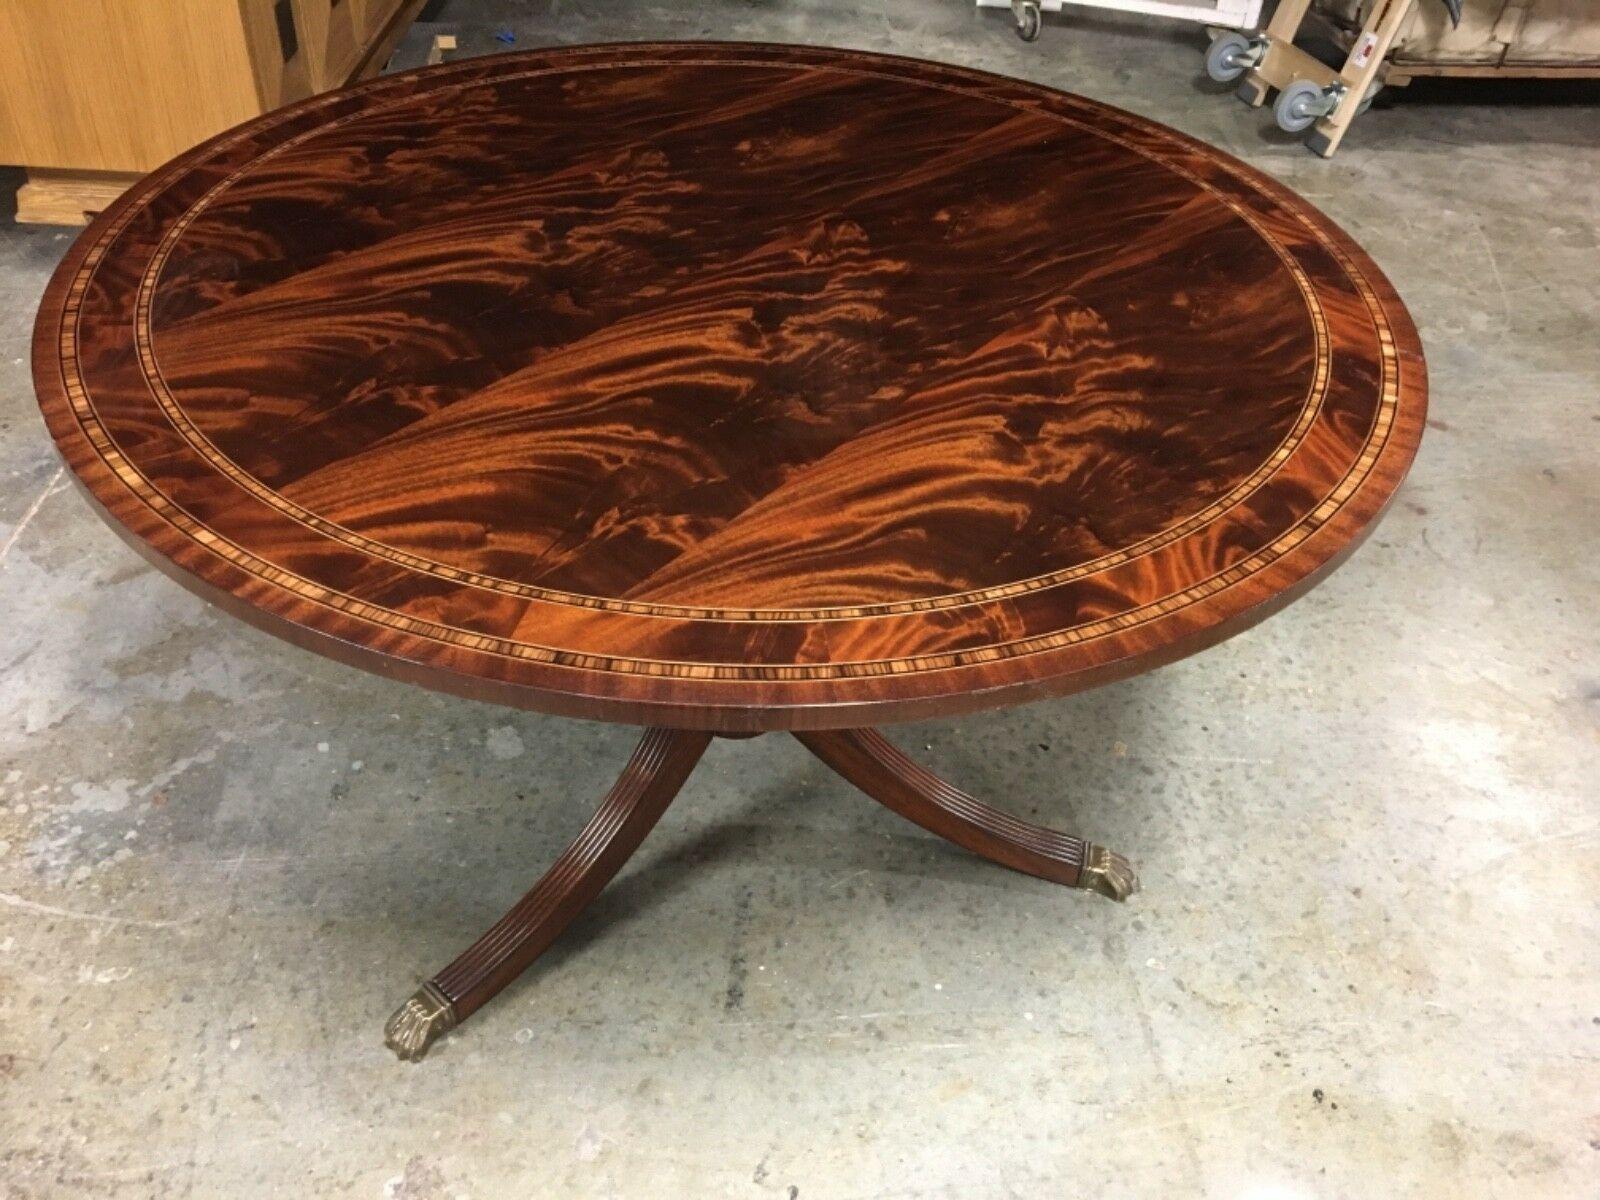 This is a made-to-order round traditional mahogany accent/foyer table made in the Leighton Hall shop. It features a field of crotch mahogany and borders of crotch mahogany and straight grain mahogany with inlays of Zebra wood. It has a hand rubbed